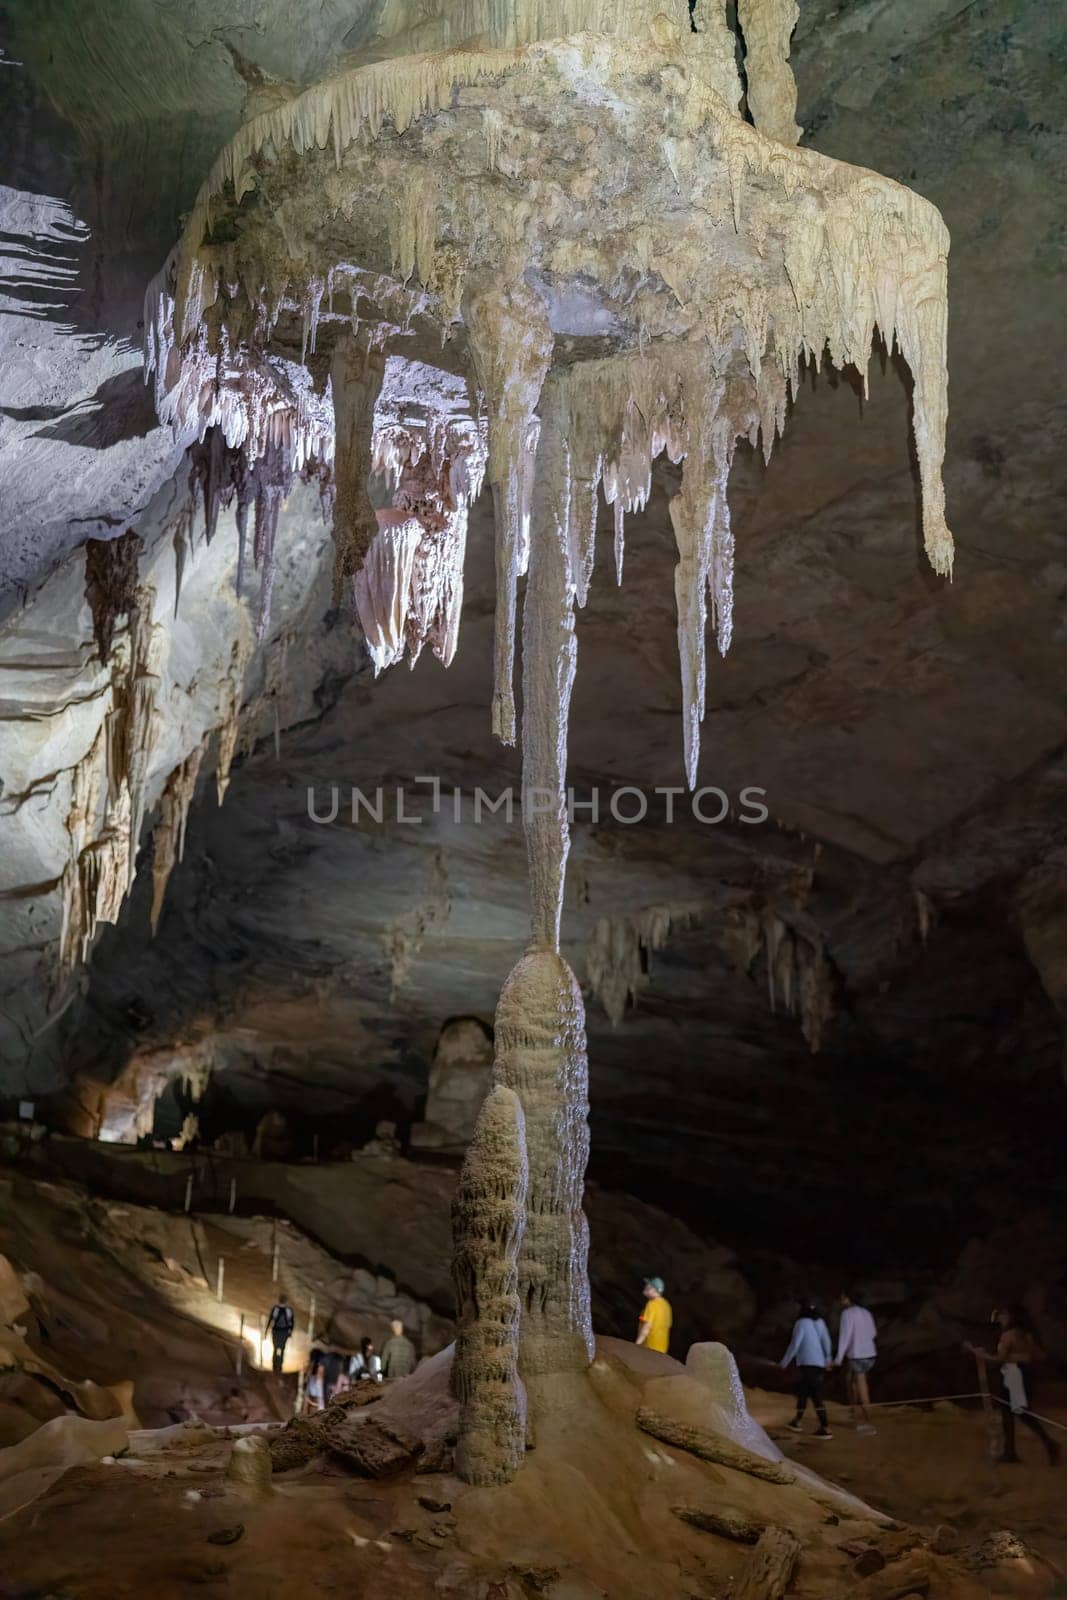 Majestic Stalactite and Stalagmite Formation in Cave by FerradalFCG